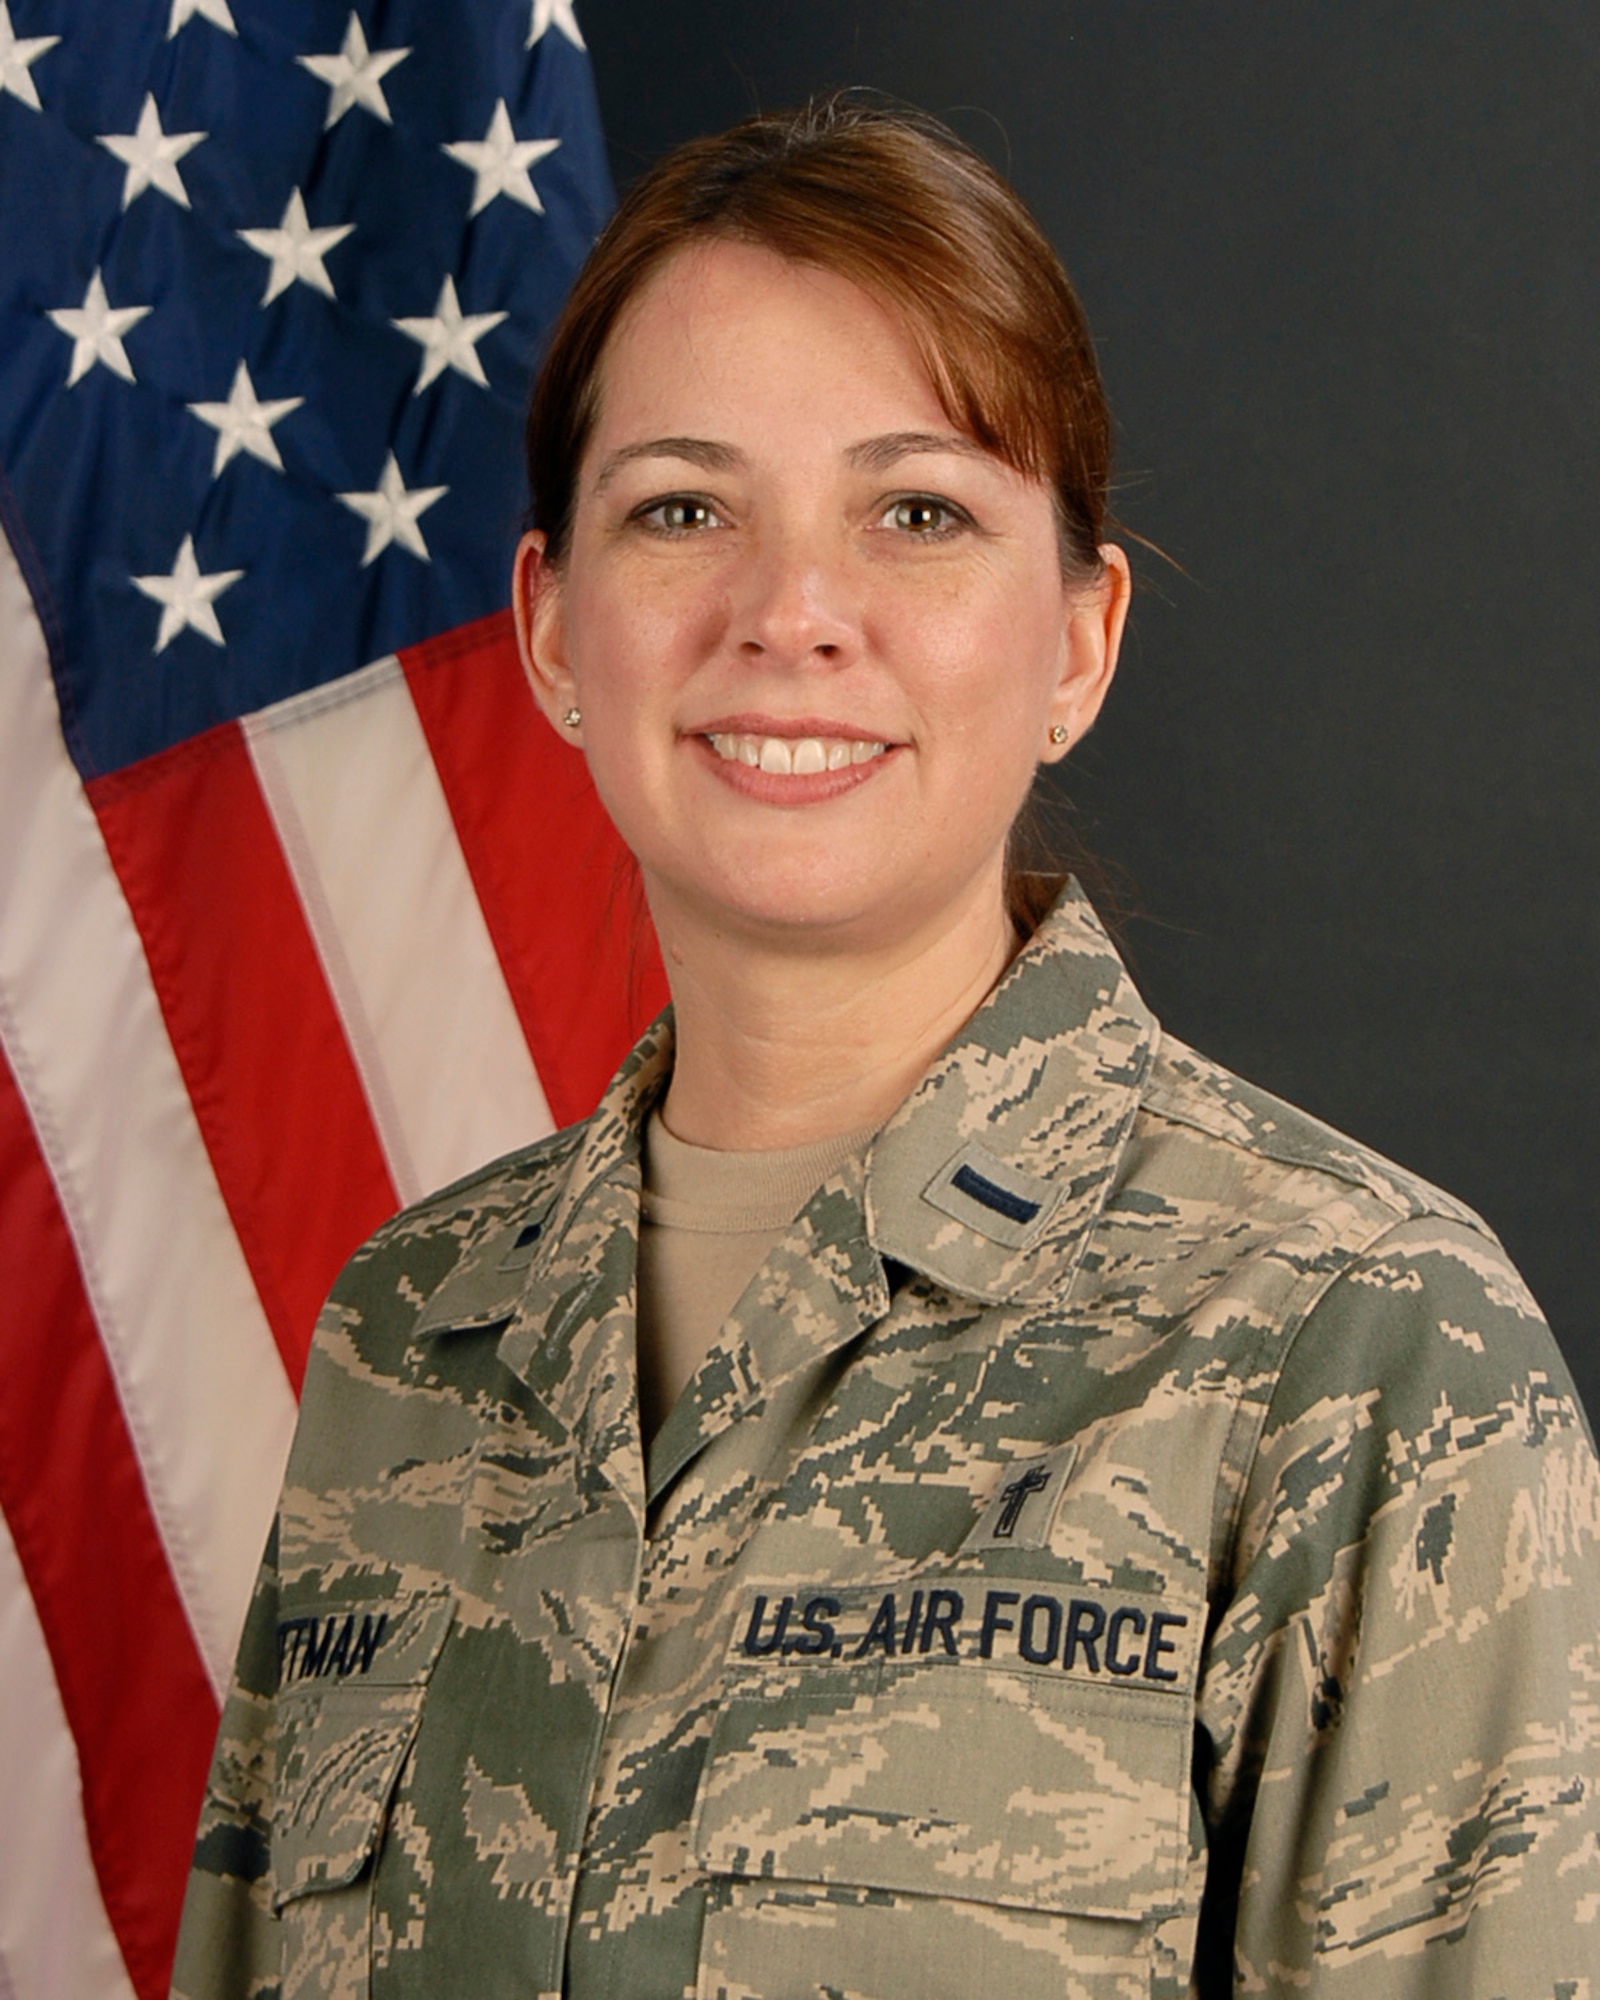 1st Lt. Christina Pittman, a Chaplain with the 169th FW at McEntire Joint National Guard Base, S.C., poses for her photo on February 5, 2012.
(National Guard photo by Tech. Sgt. Caycee Watson/Released)